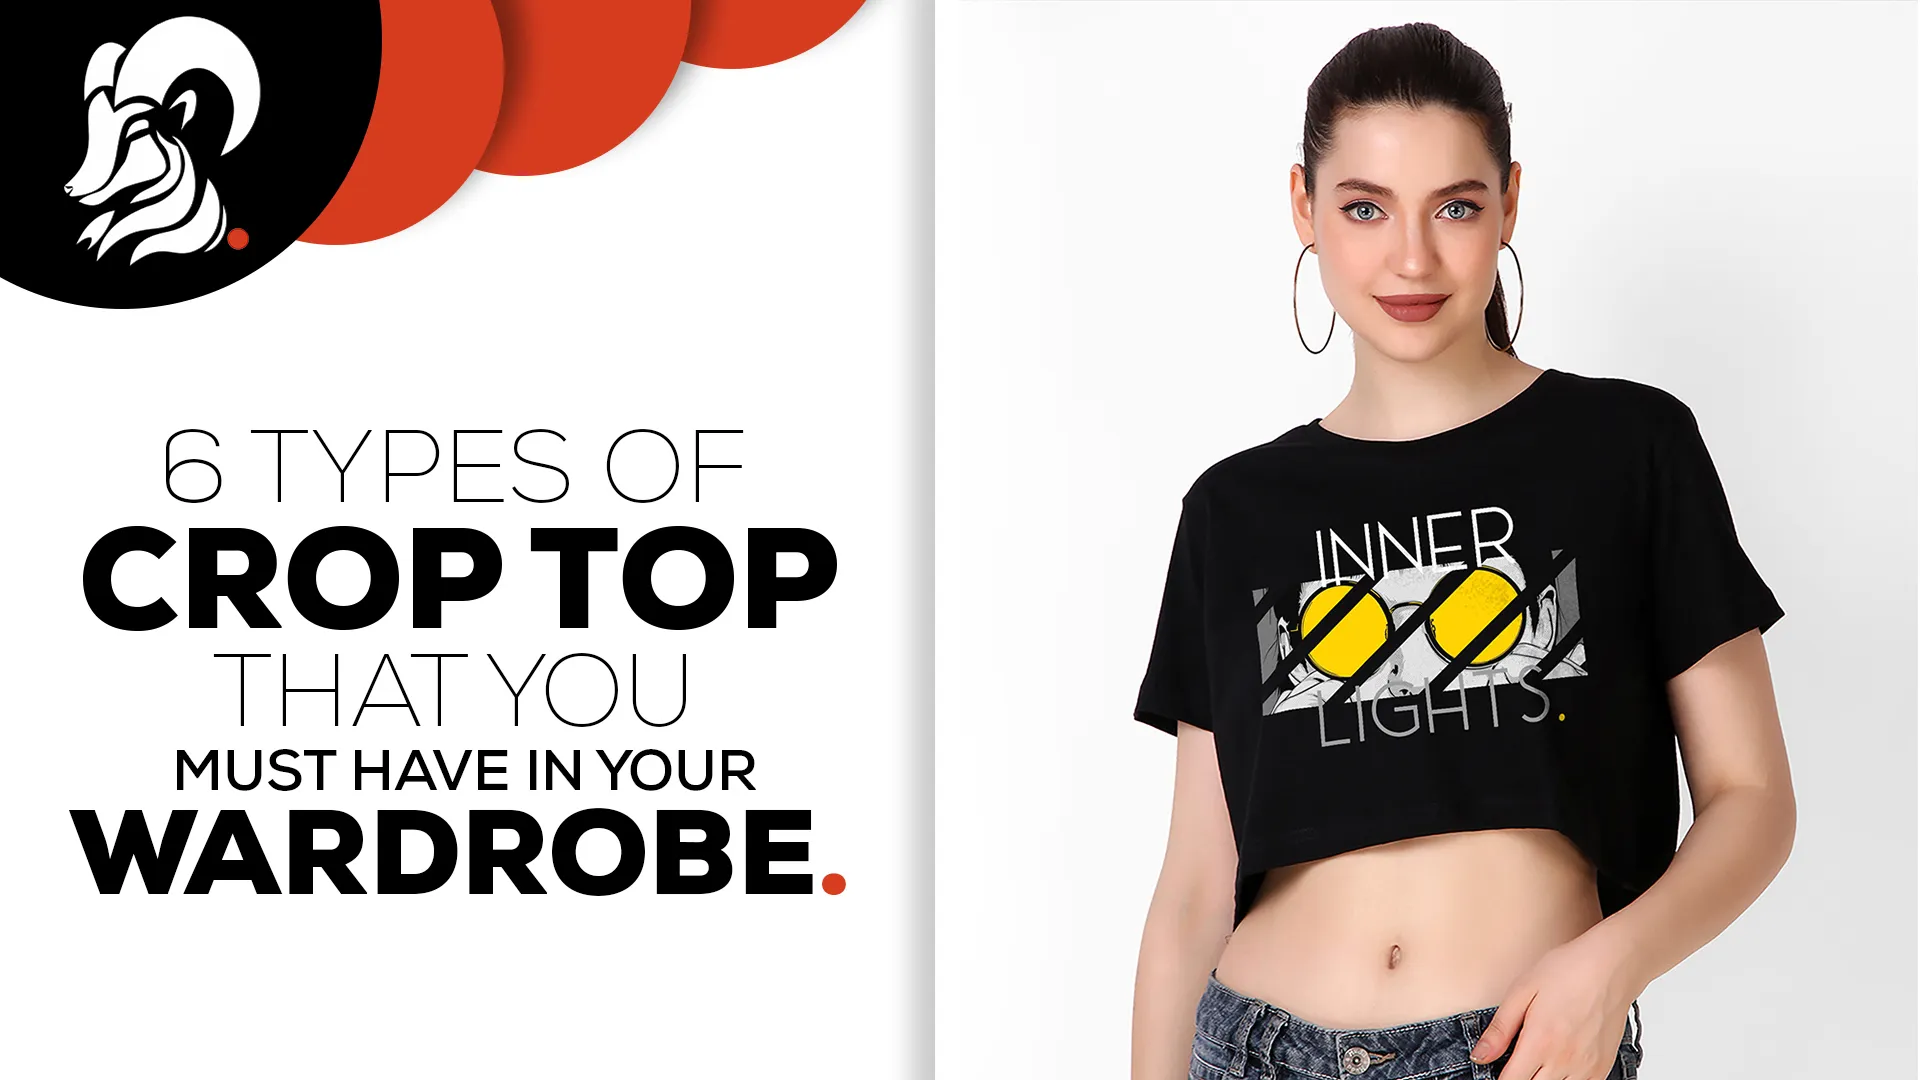 Fashion hustla - Did you know the types of the crop top if you don